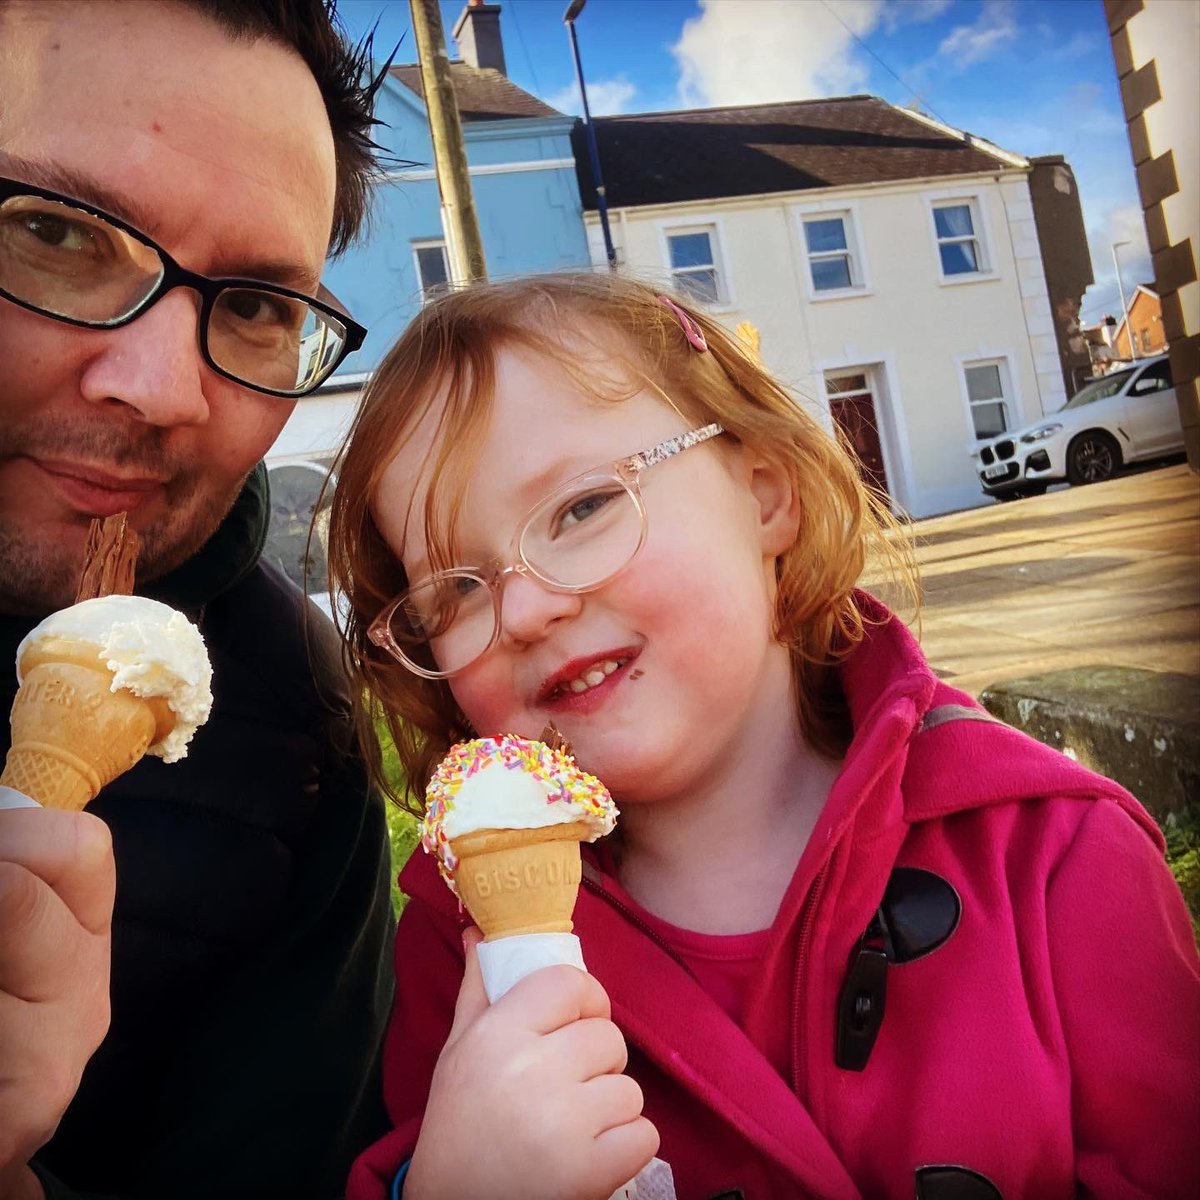 After a busy week, nothing better than some uncle time, in the spring sunshine, playing on the swings, feeding the ducks, and eating ice-cream ❤️ #uncle #niece #uncleniecetime #ballycastle #beach #icecream